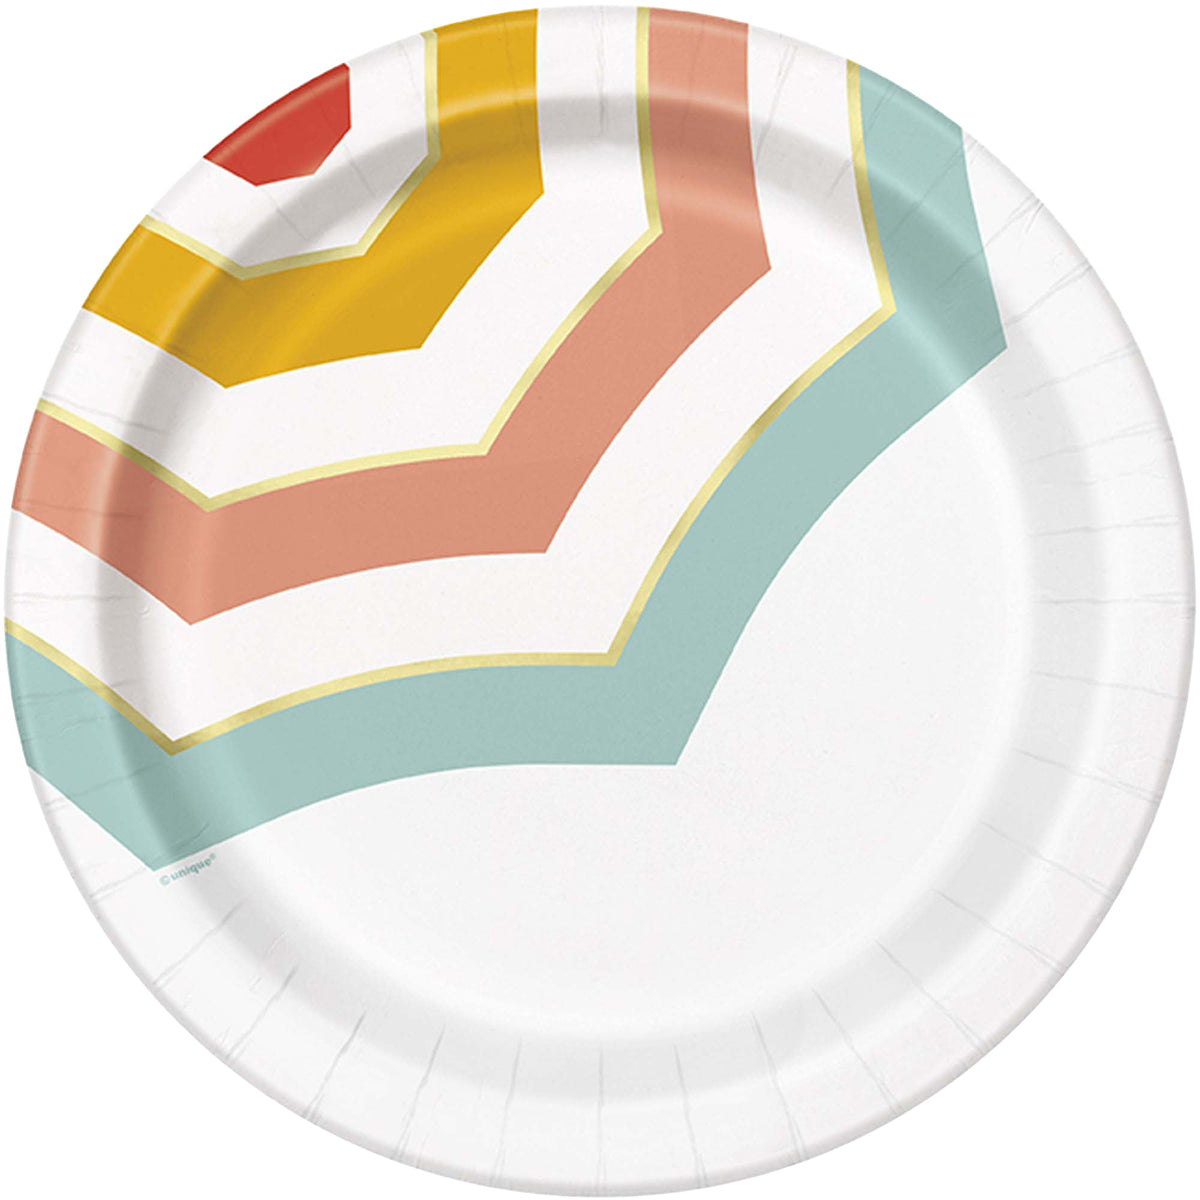 AMSCAN CA Summer Poolside Summer Large Round Lunch Paper Plates, 9 Inches, 8 Count